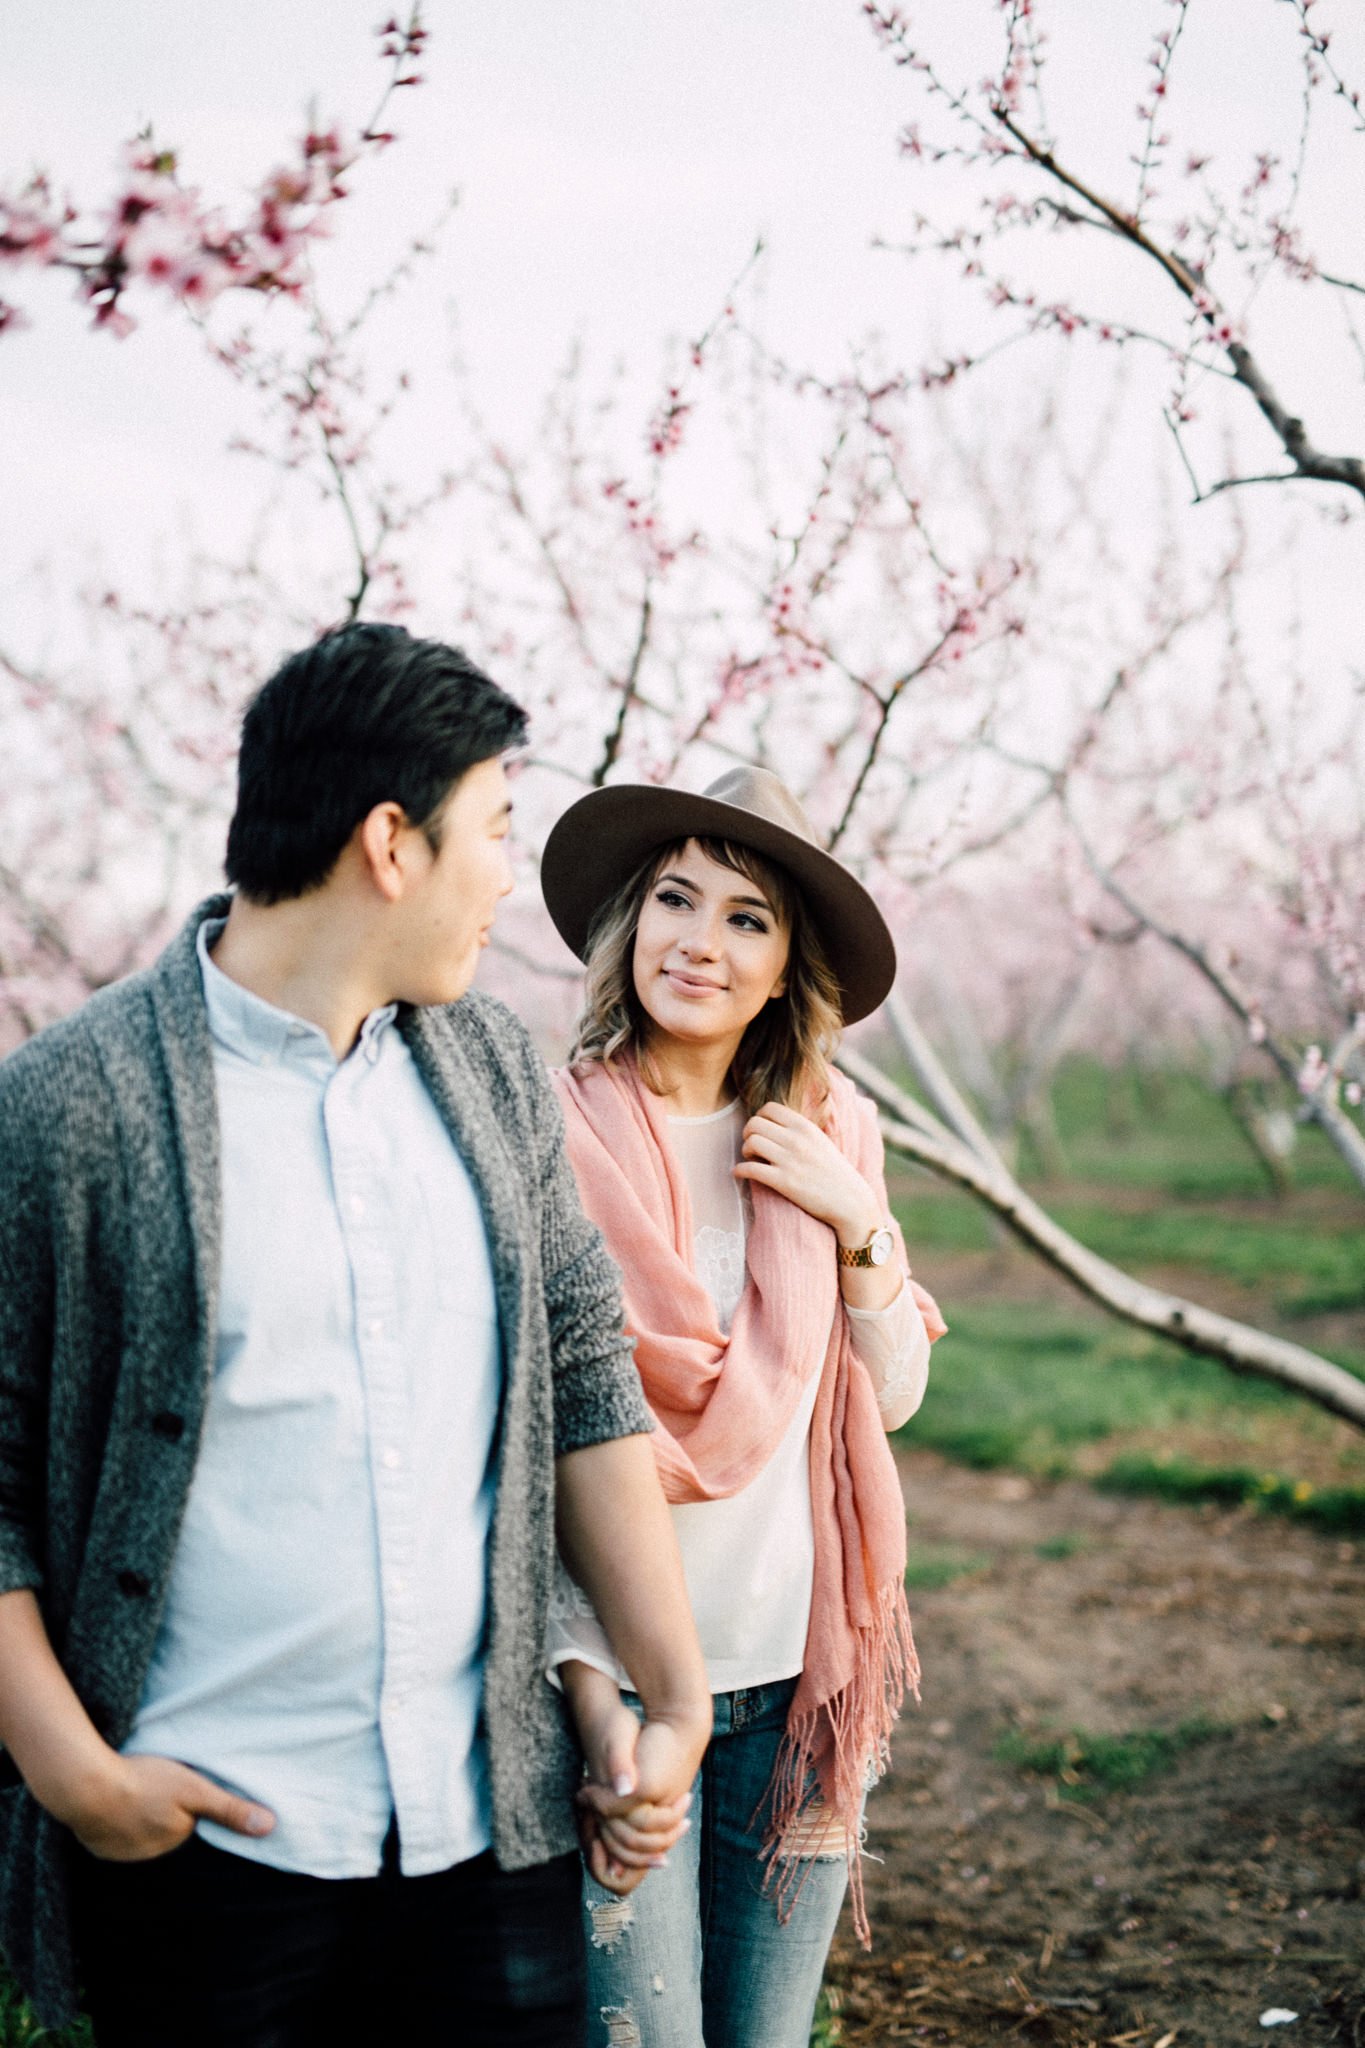 Niagara-Portrait-Session-Niagara-On-The-Lake-Cherry-Blossoms-photography-by-Simply-Lace-Photography-038.JPG